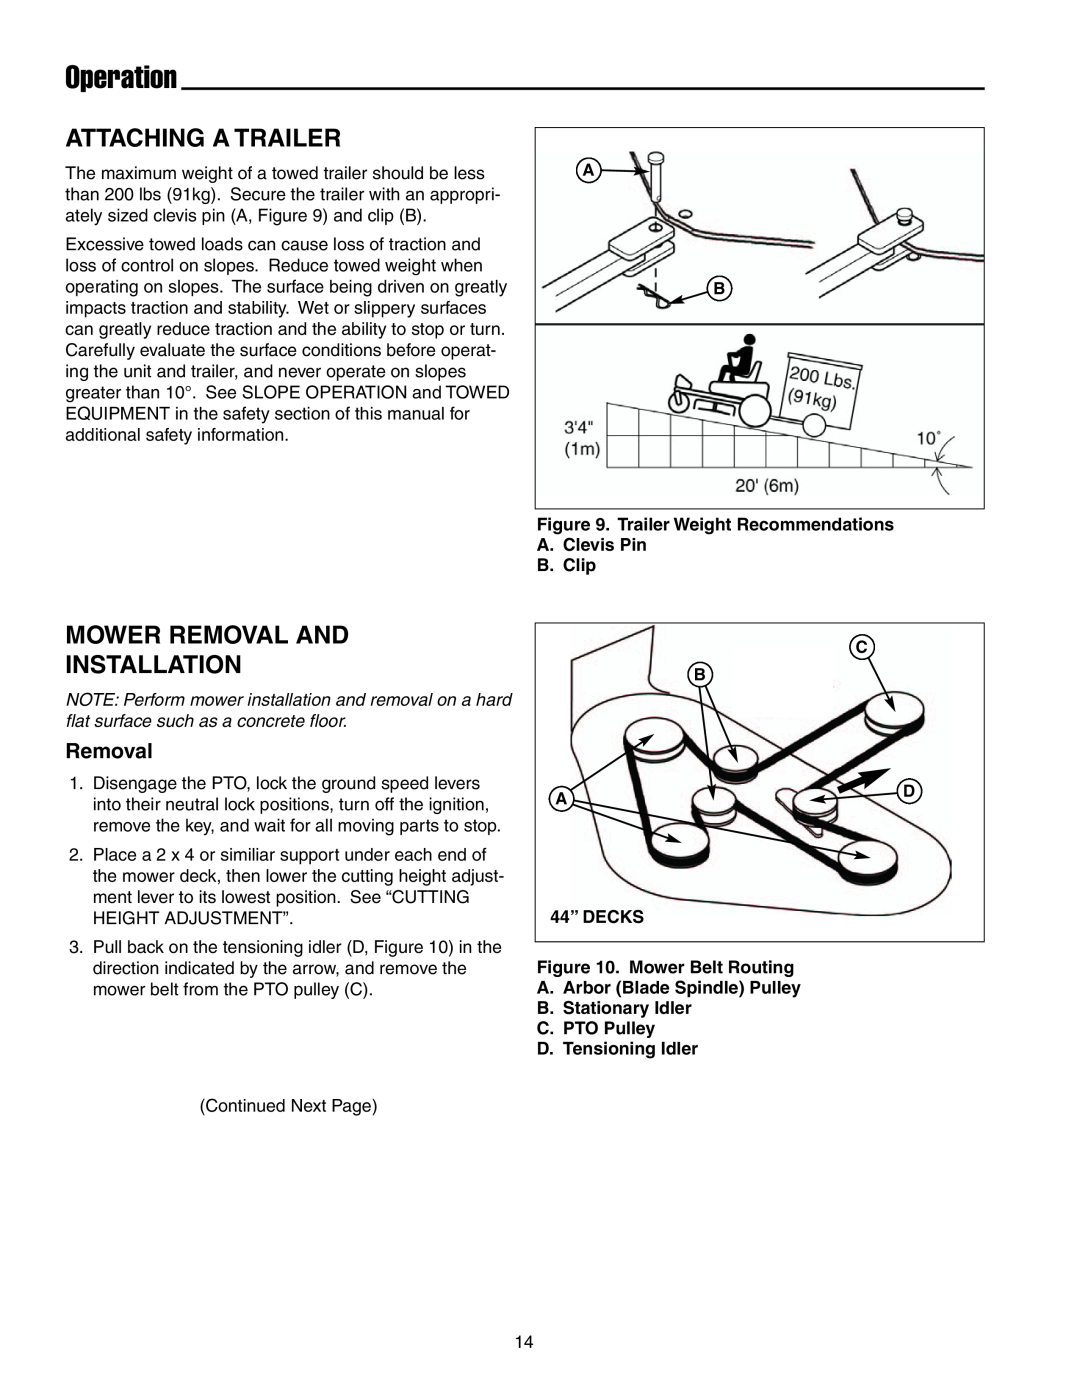 Snapper ERZT20441BVE2 manual Attaching A Trailer, Mower Removal And Installation, Operation 